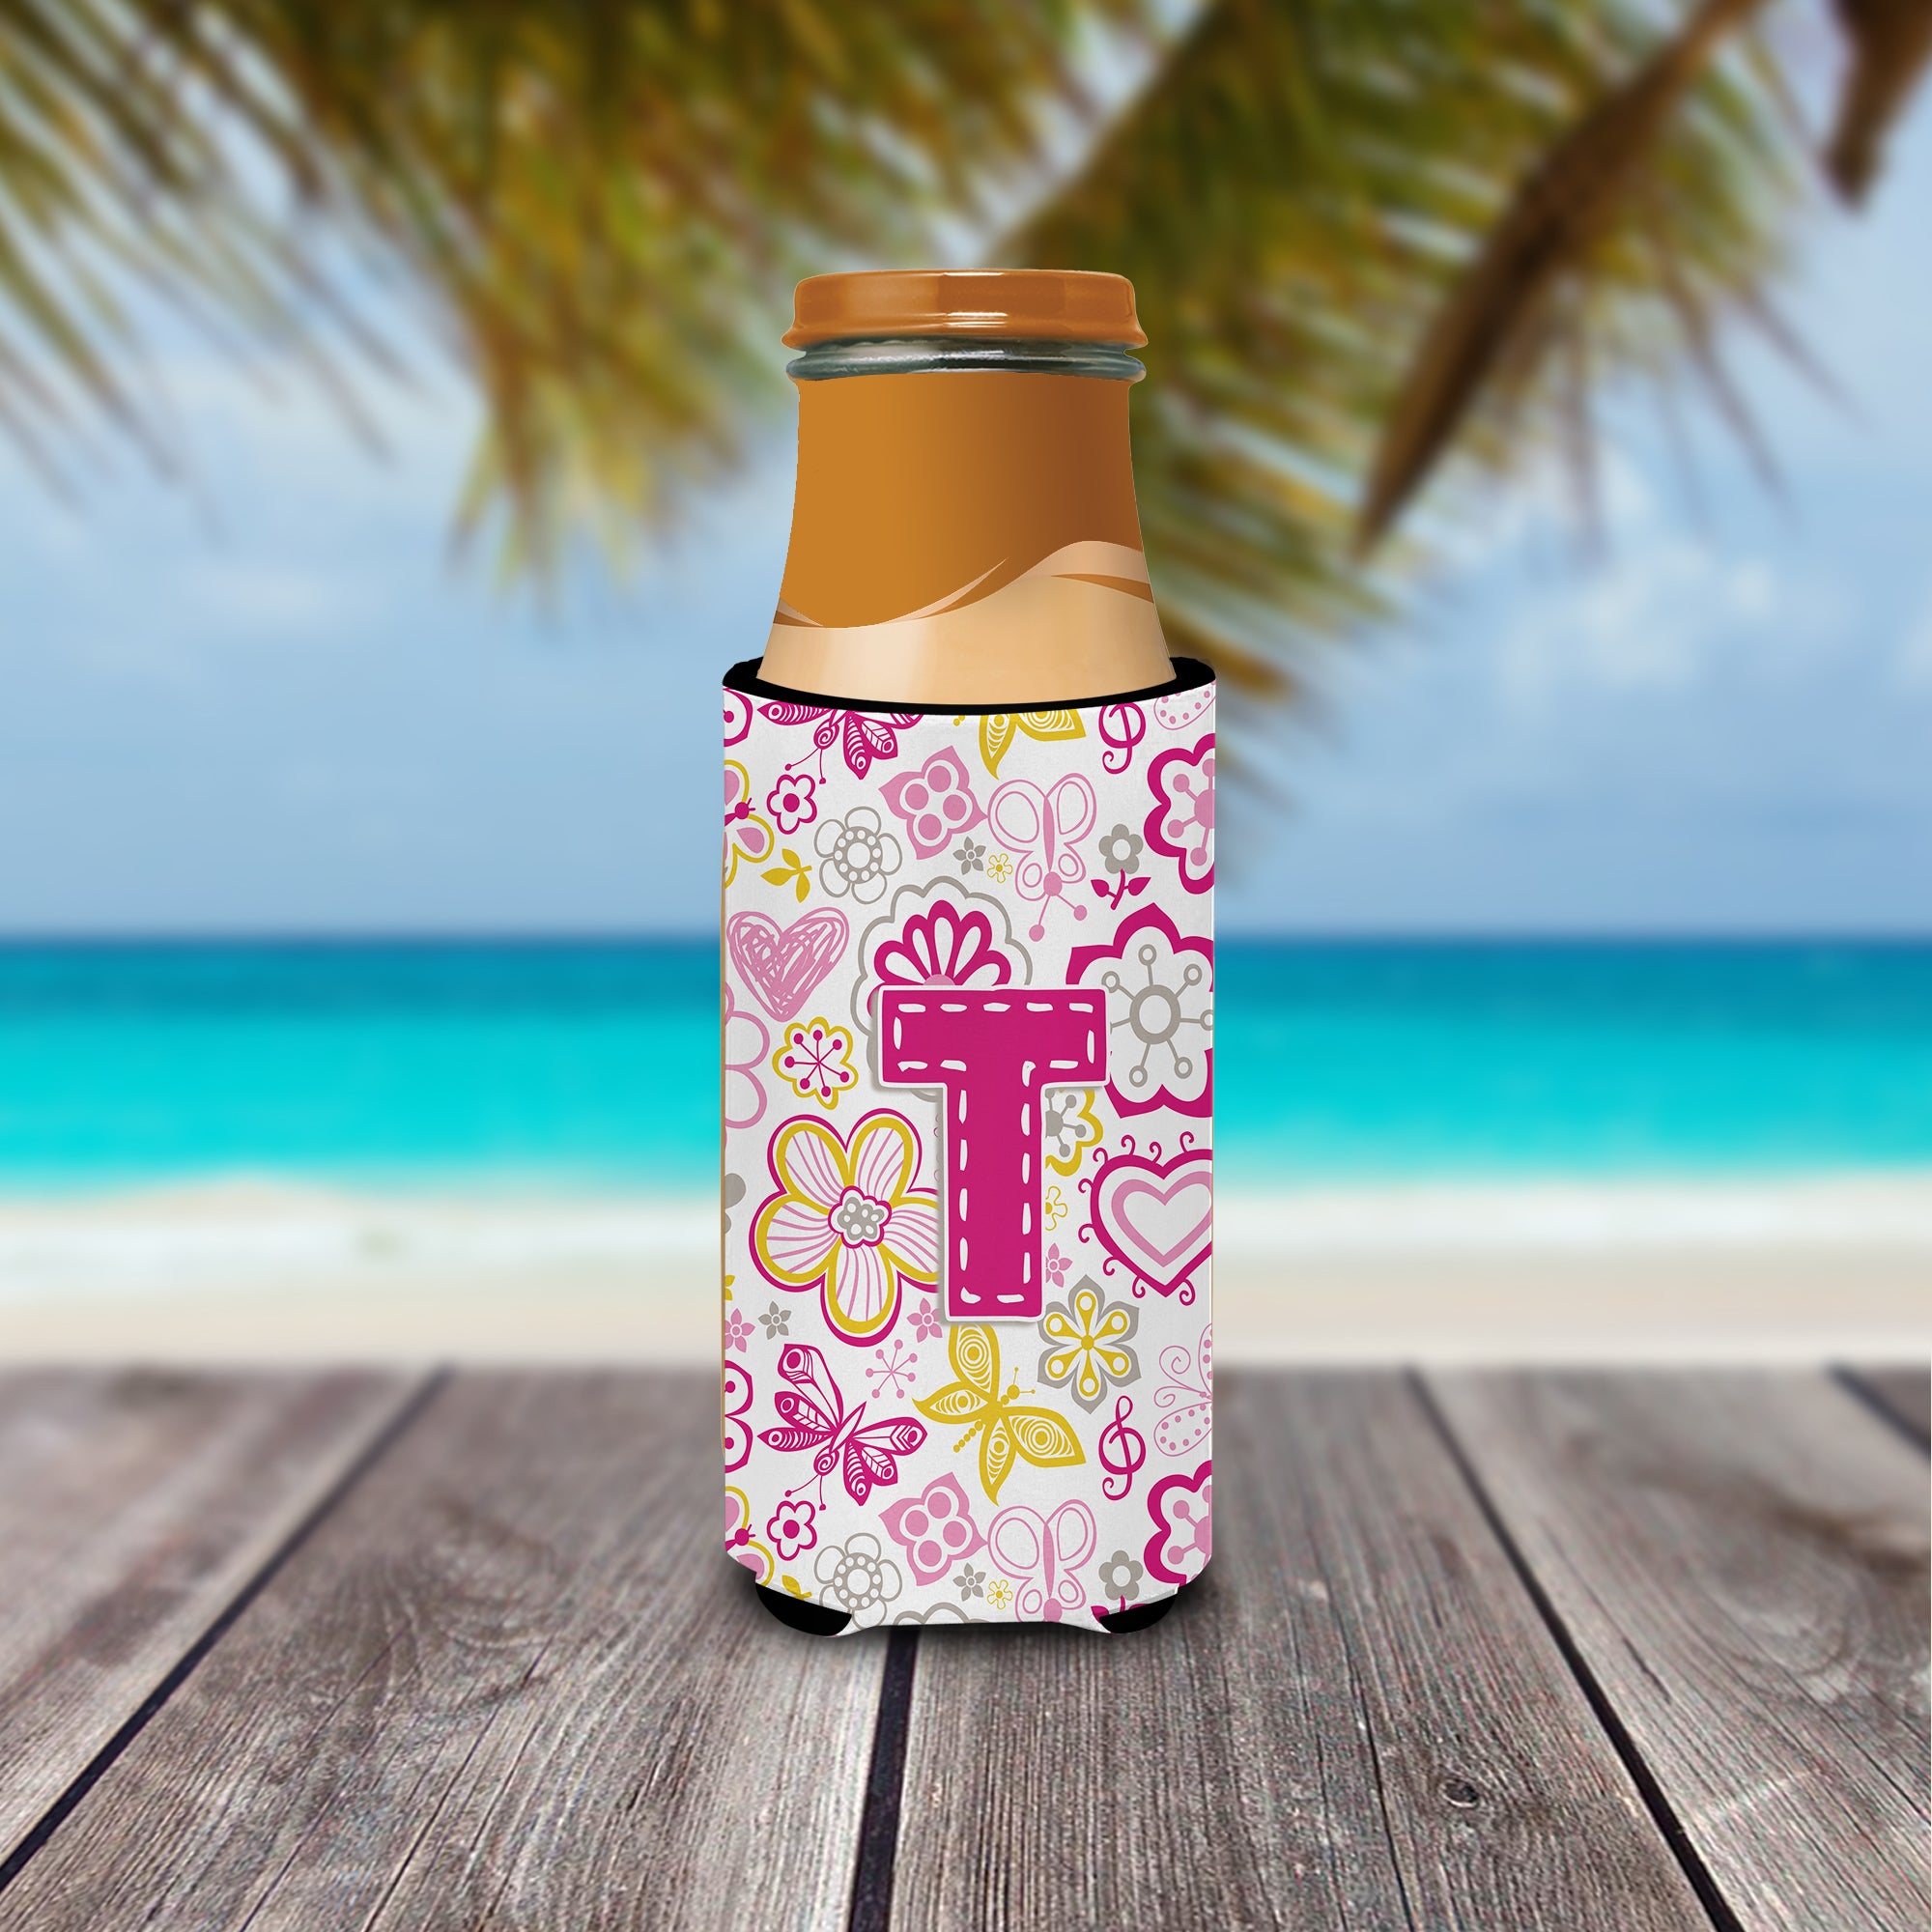 Letter T Flowers and Butterflies Pink Ultra Beverage Insulators for slim cans CJ2005-TMUK.